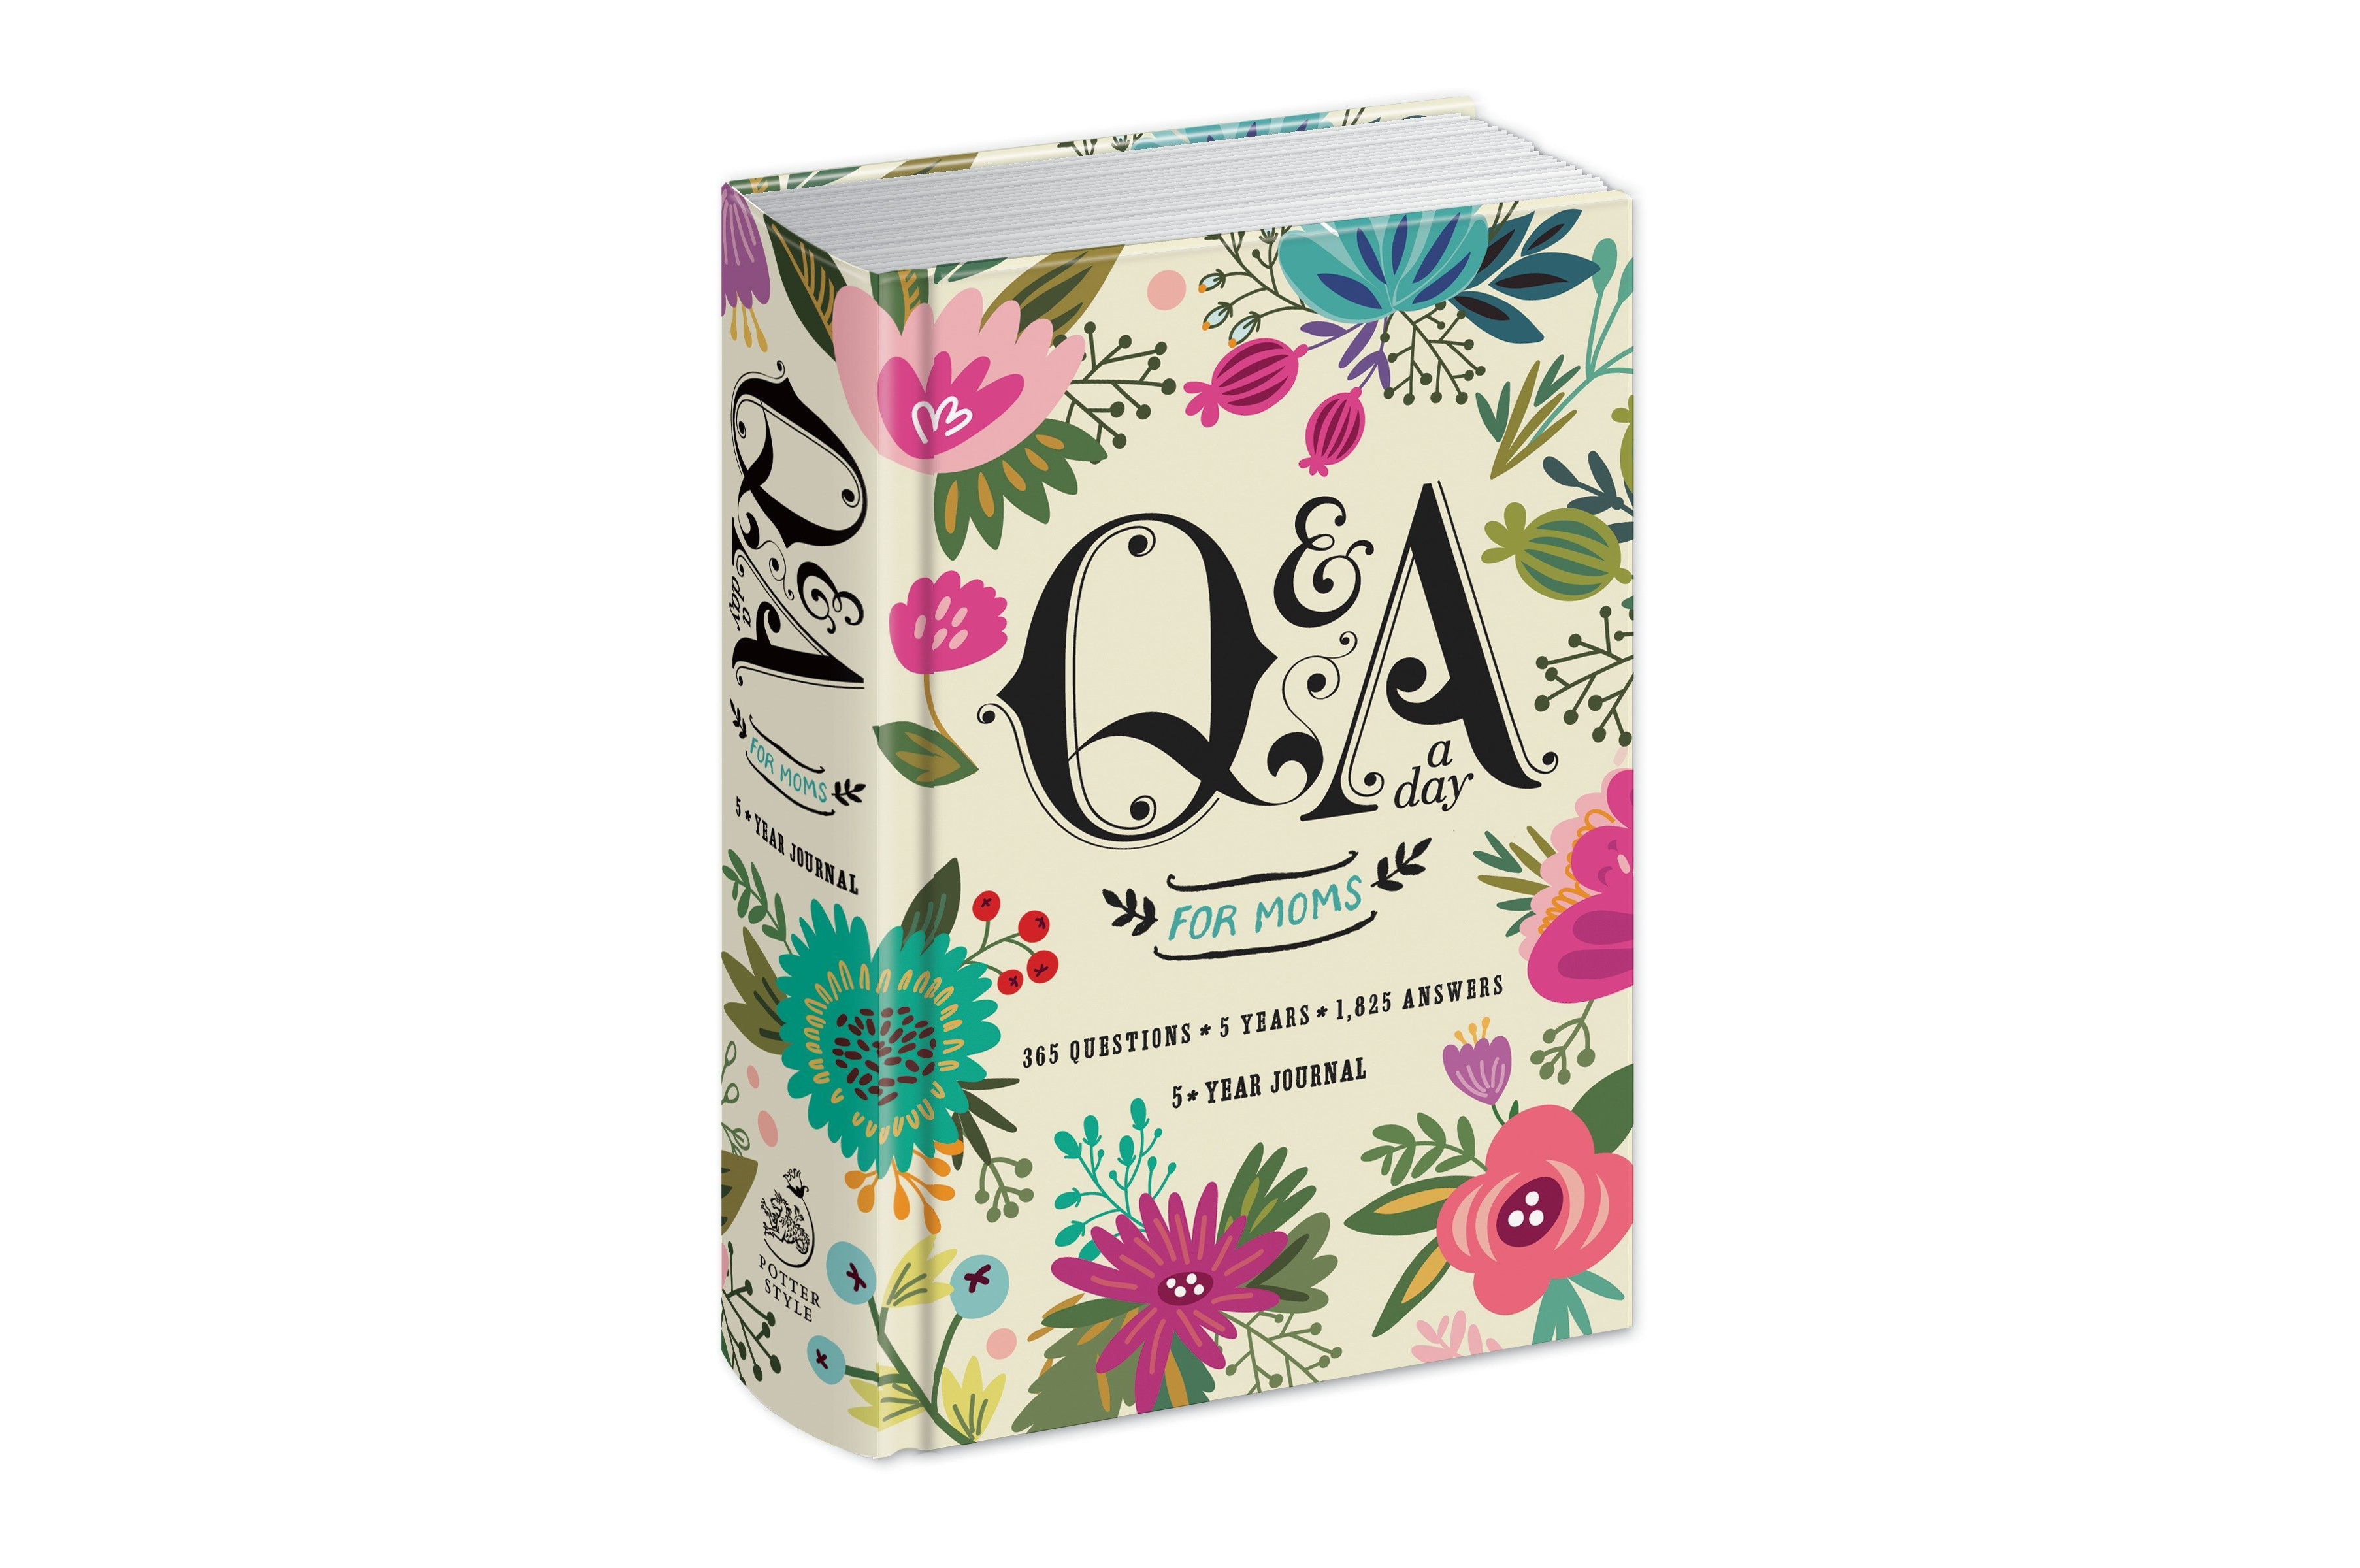 ‘Q&A a Day for Moms’ book